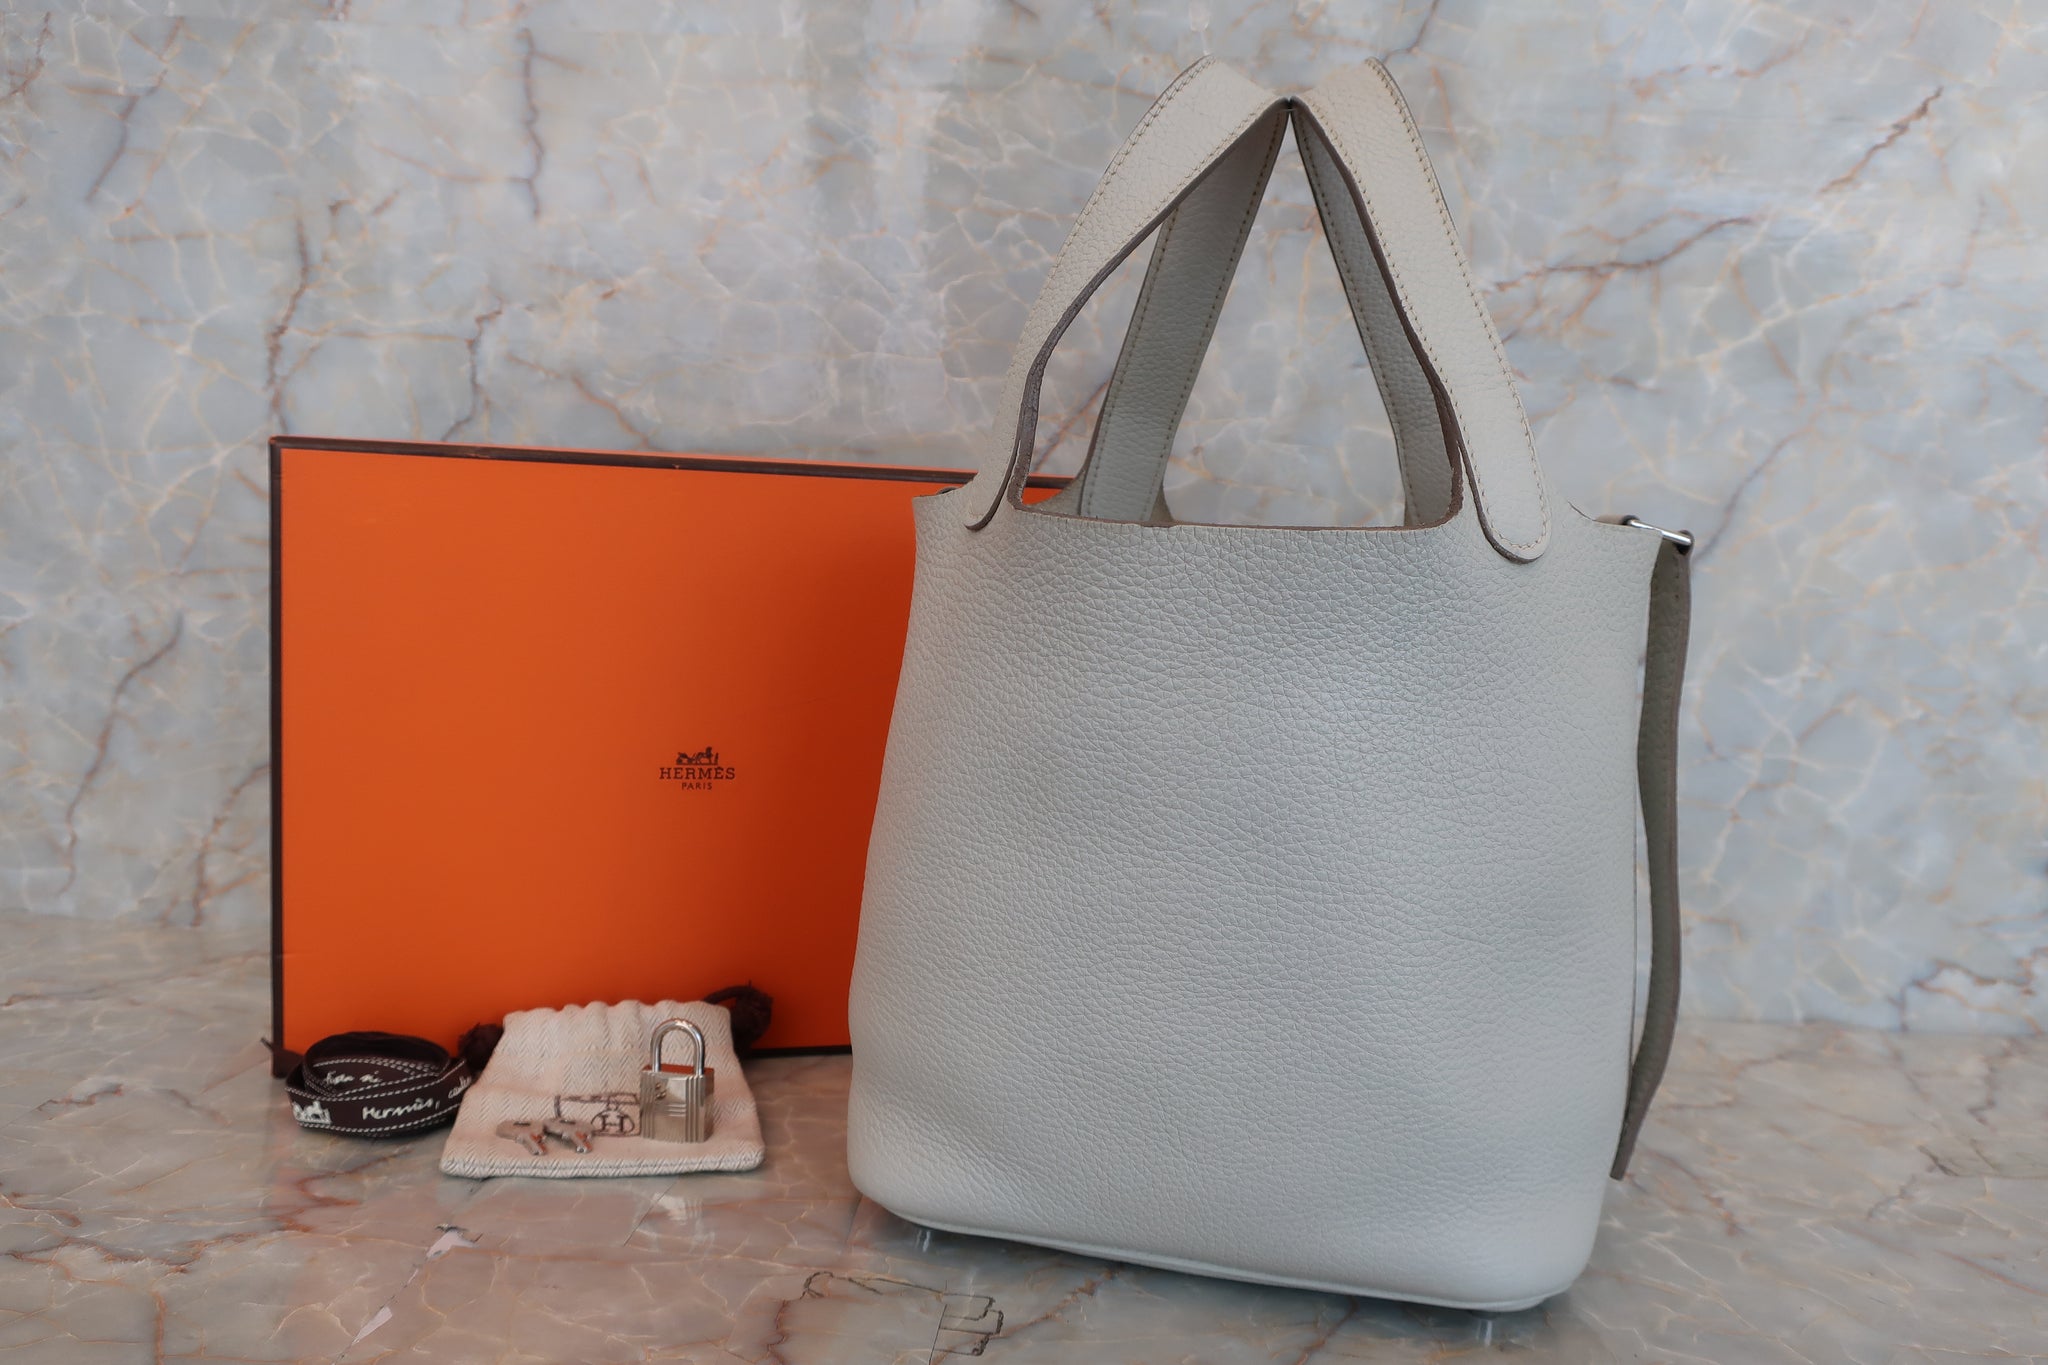 HERMES PICOTIN LOCK PM Clemence leather Gris perle（Pearl gray